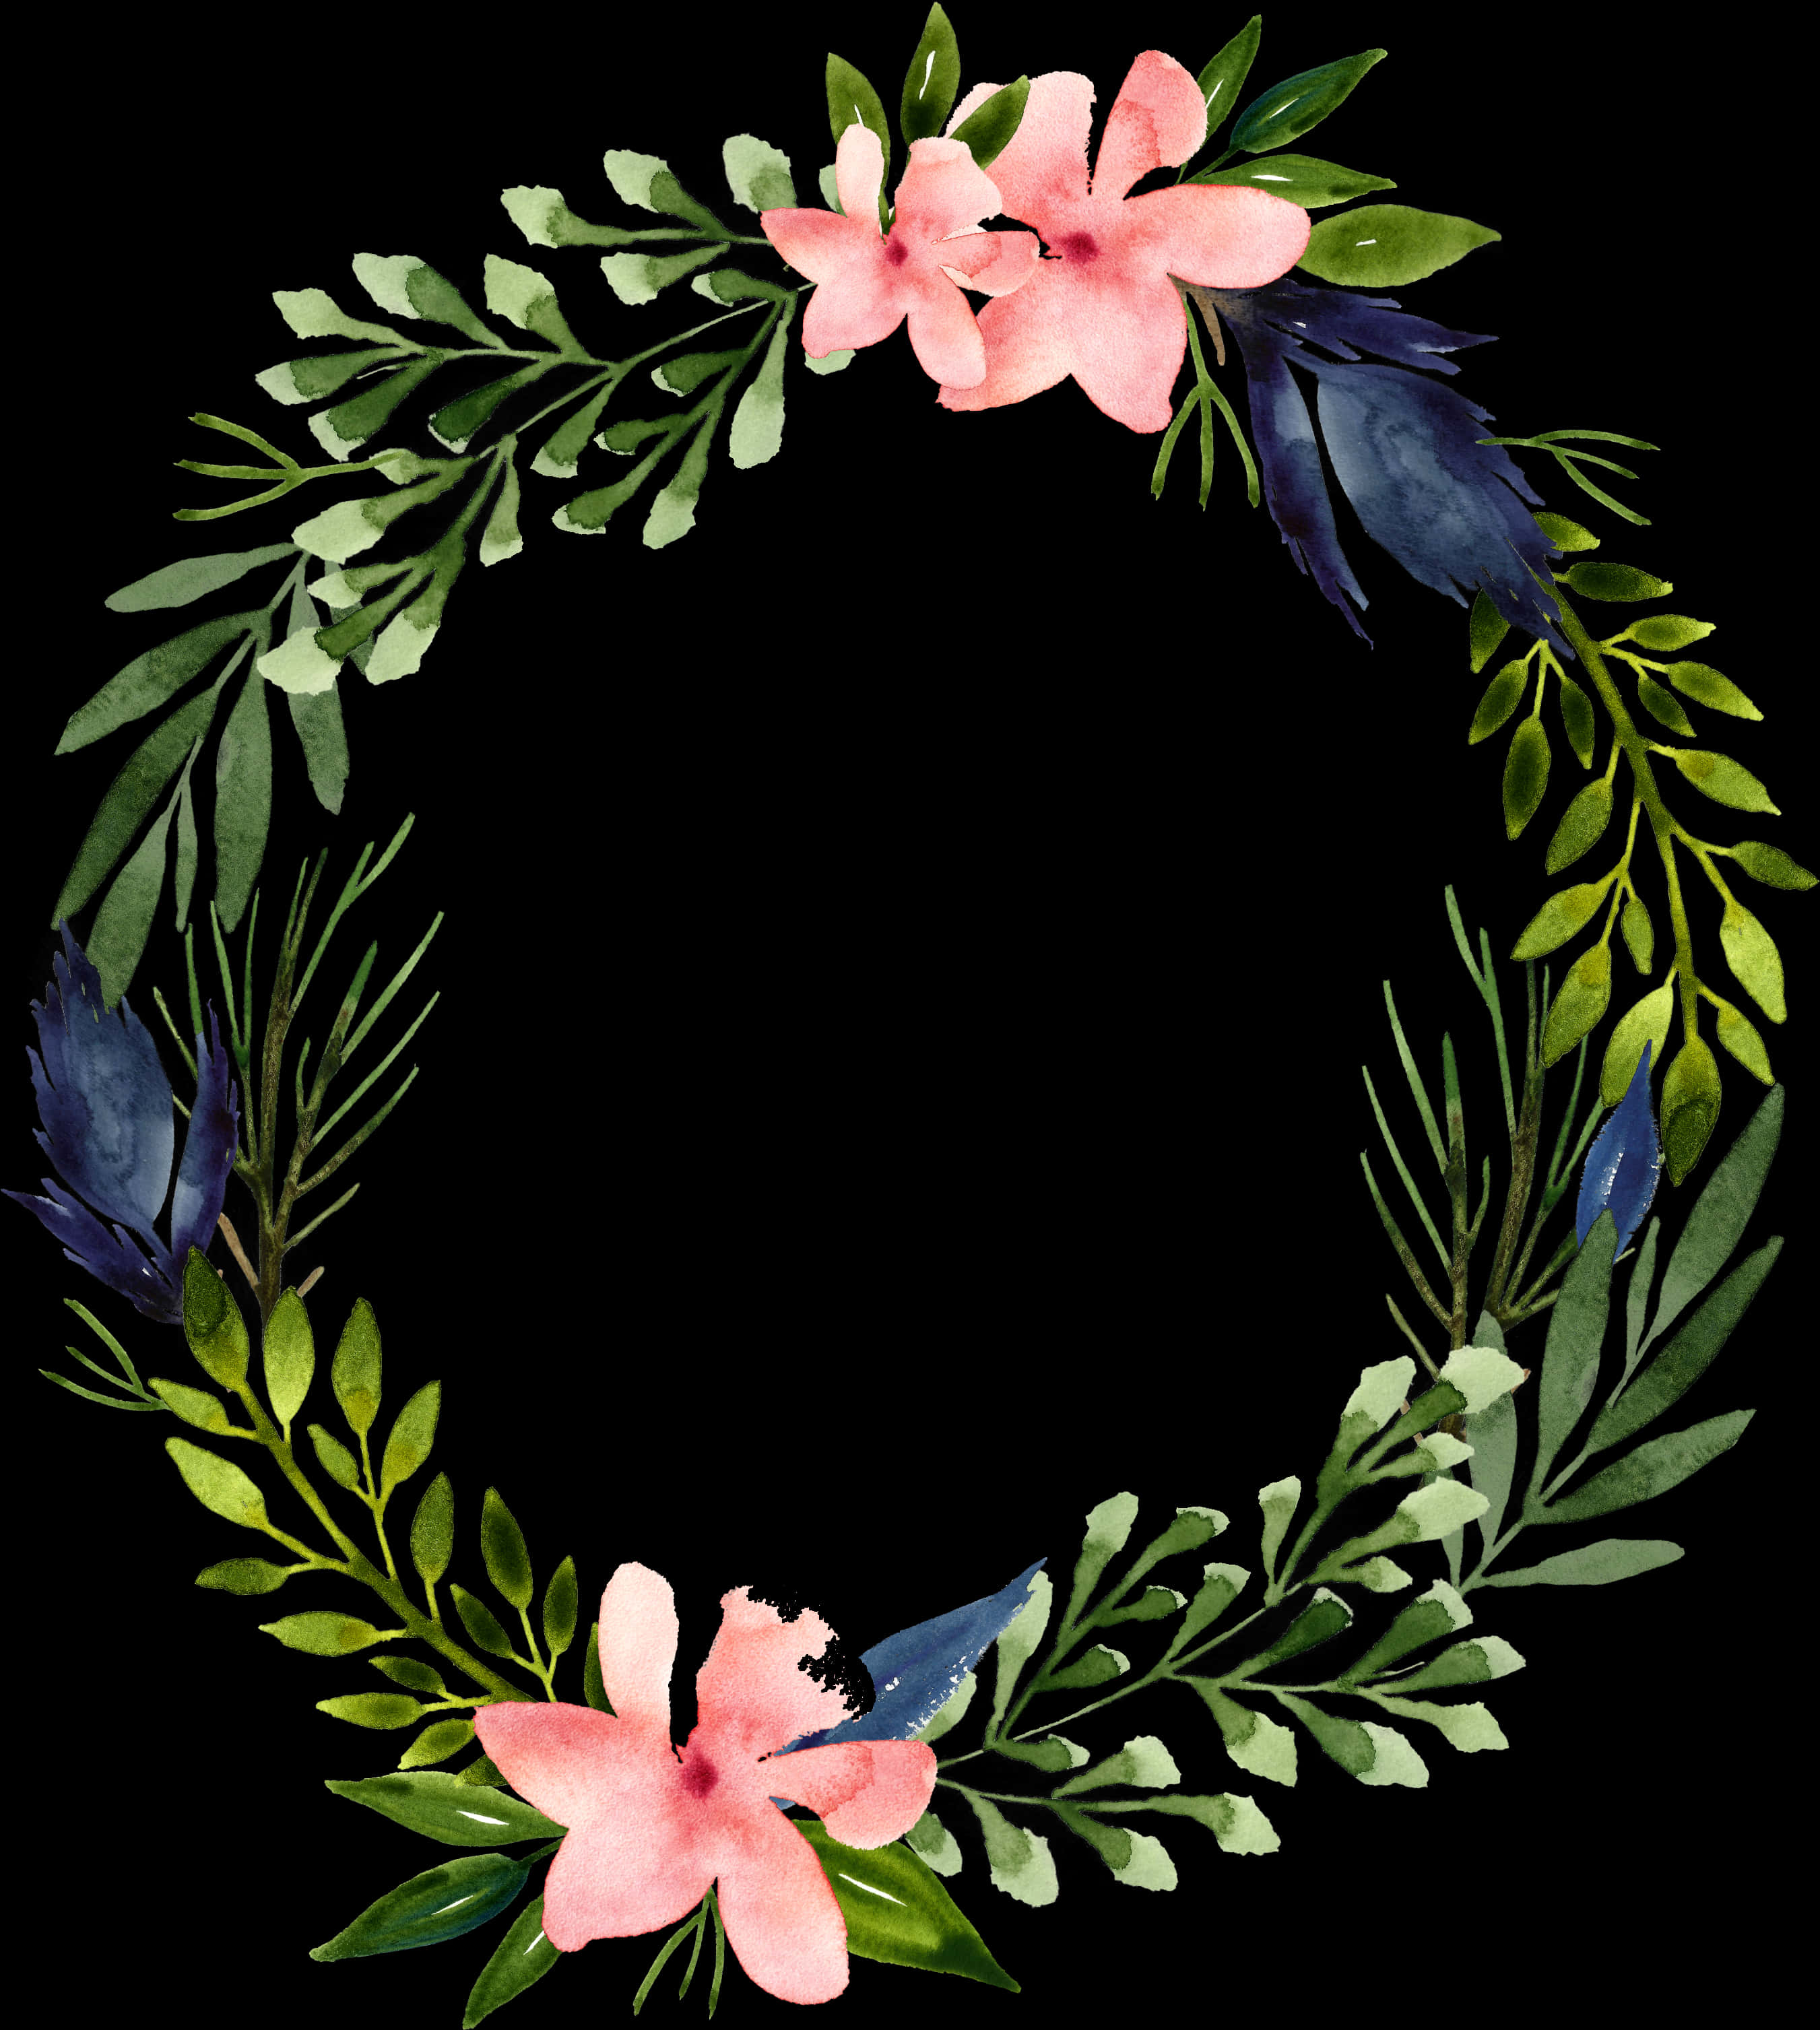 A Wreath Of Leaves And Flowers